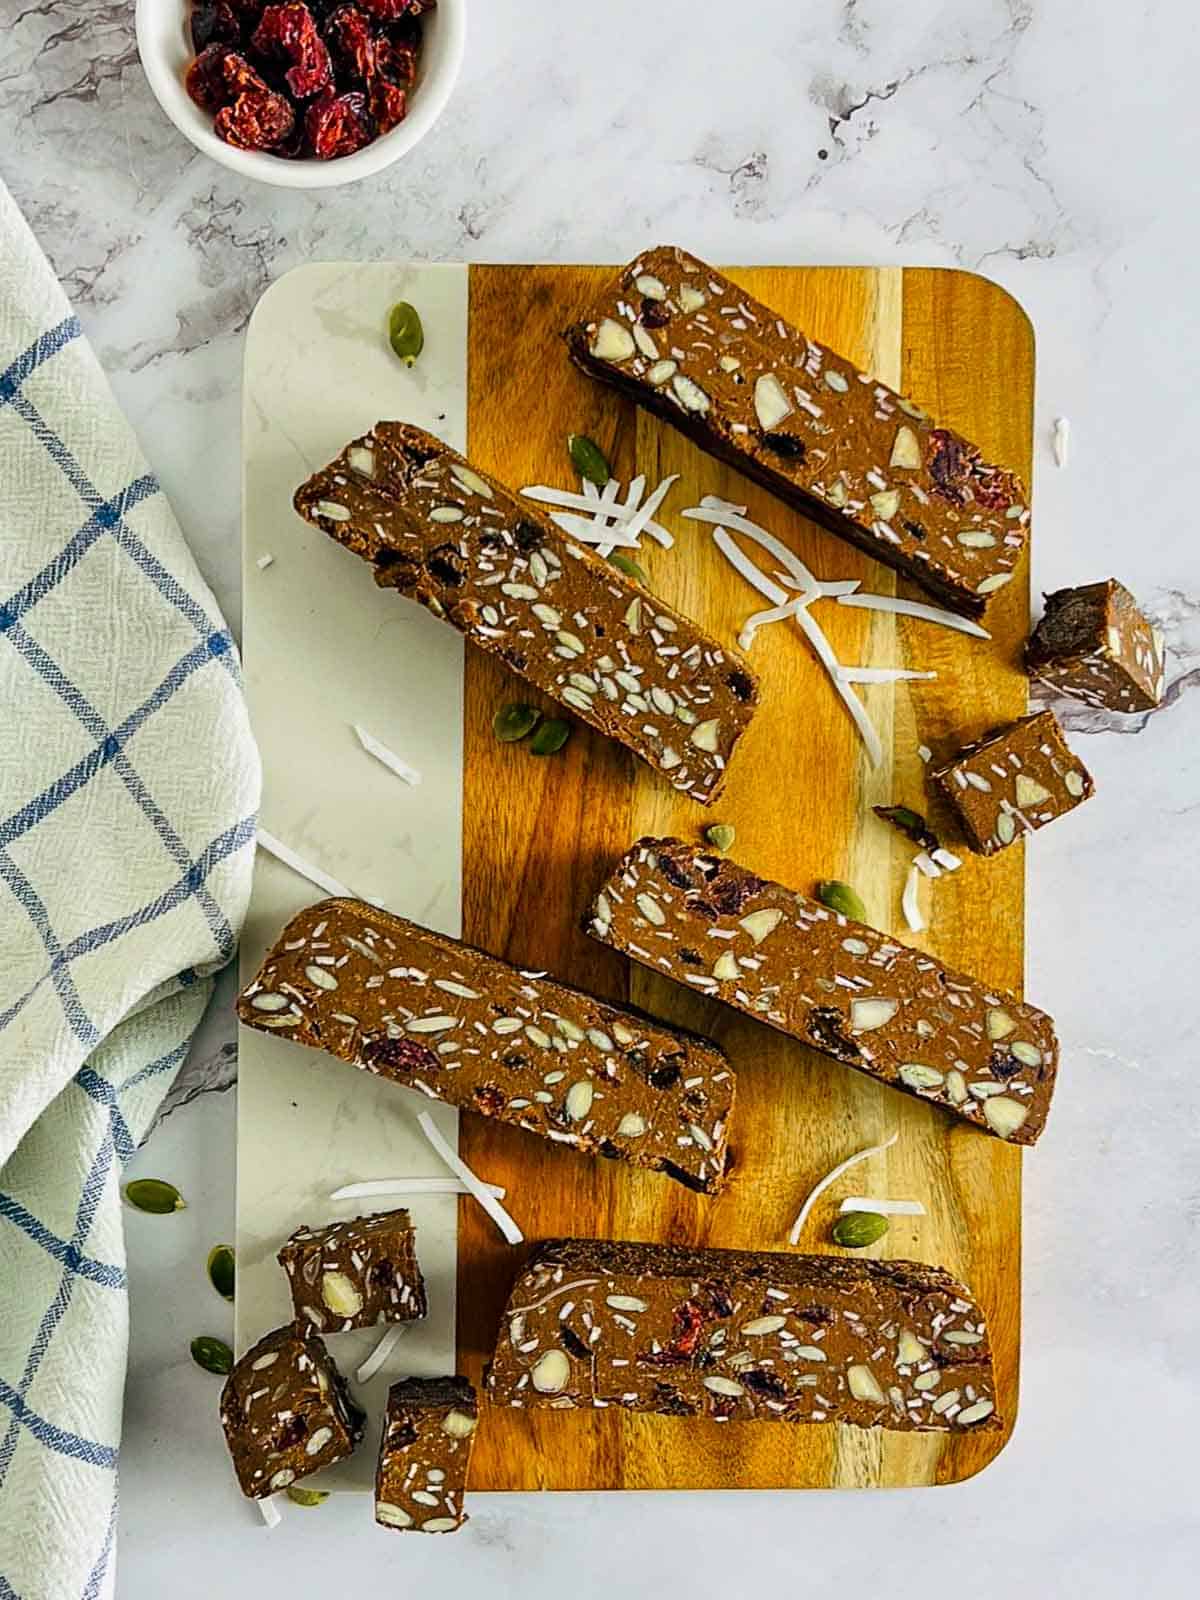 Lentil bars topped with shredded coconut and dried cranberries in the background.